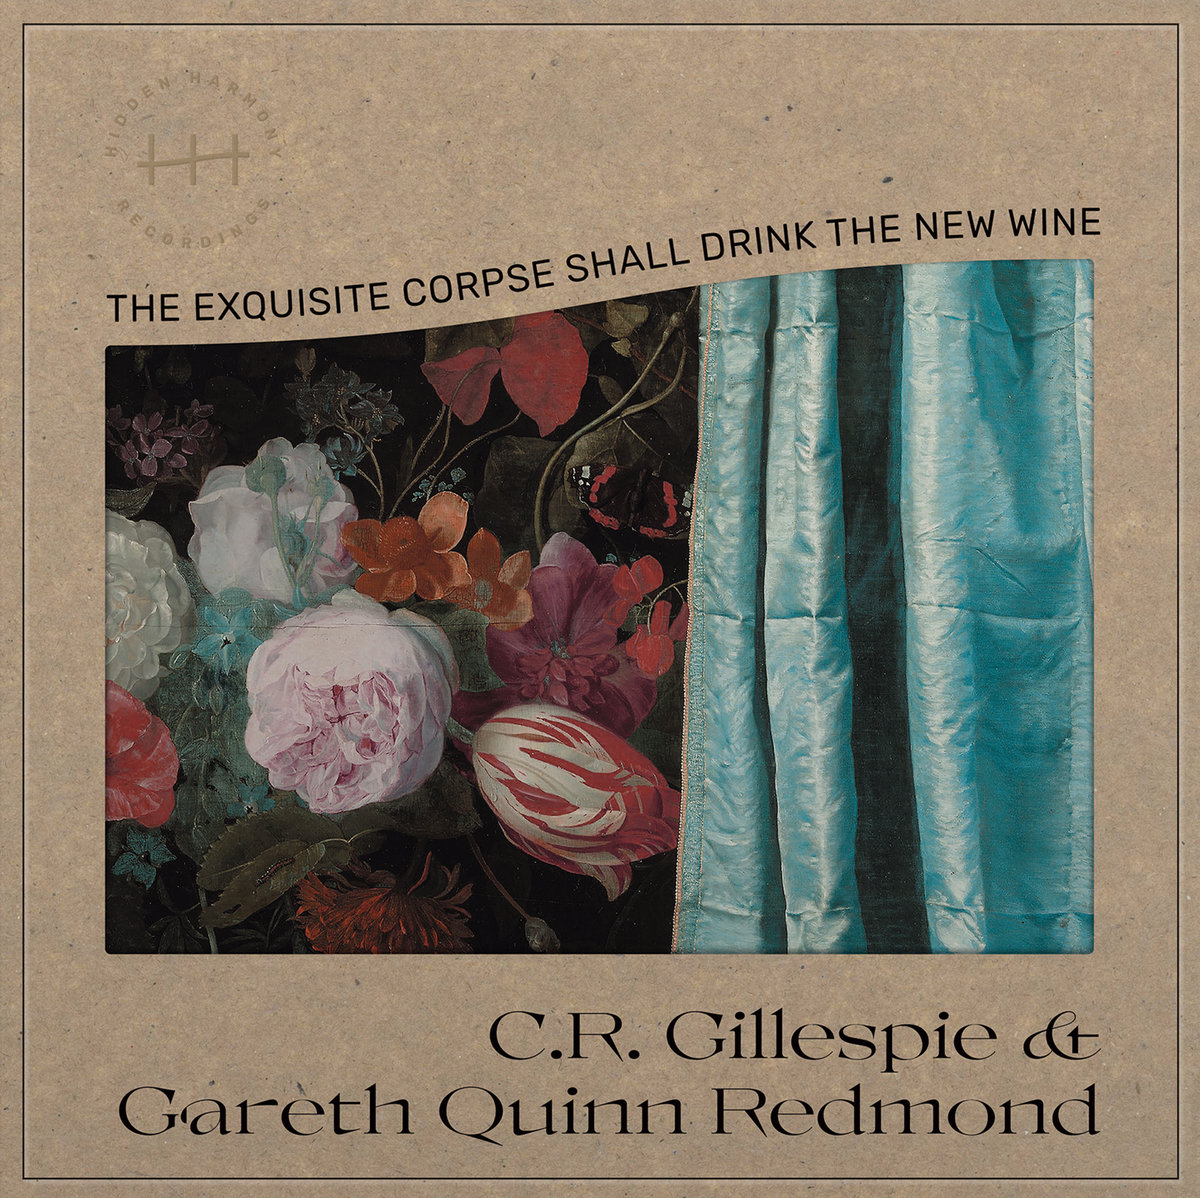 C.R.Gillespie - The Exquisite Corpse Shall Drink The New Wine - HH06 - HIDDEN HARMONY RECORDINGS